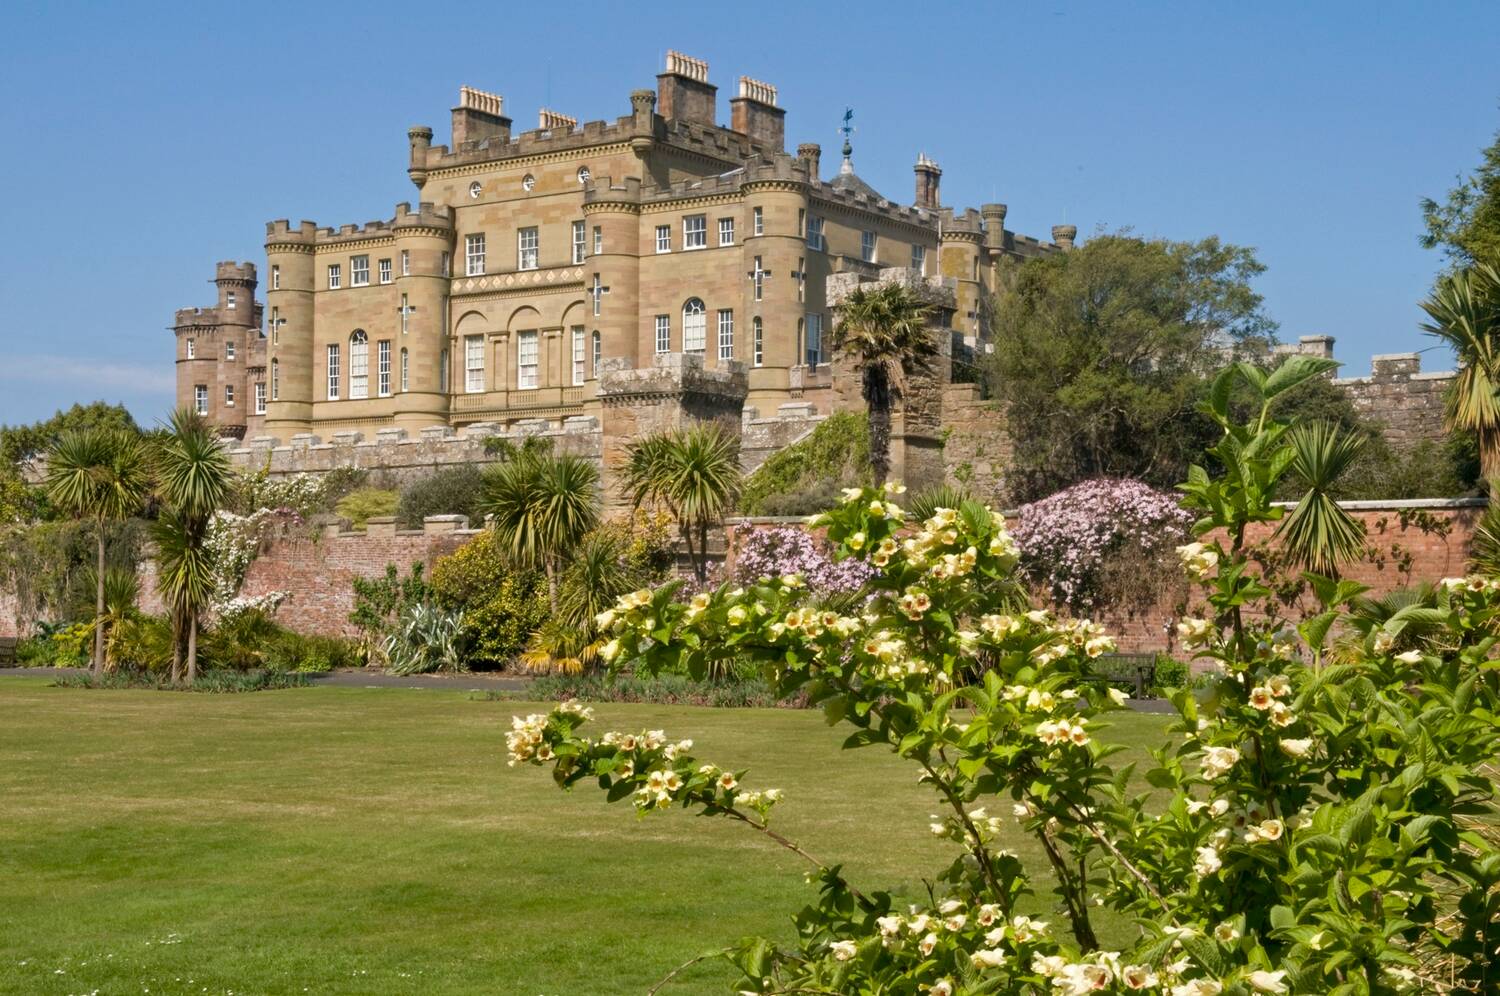 A view of Culzean Castle from the Fountain Court garden in front of it, on a sunny day. Palm trees line the walls of the garden. A flowering yellow shrub is in the right foreground.